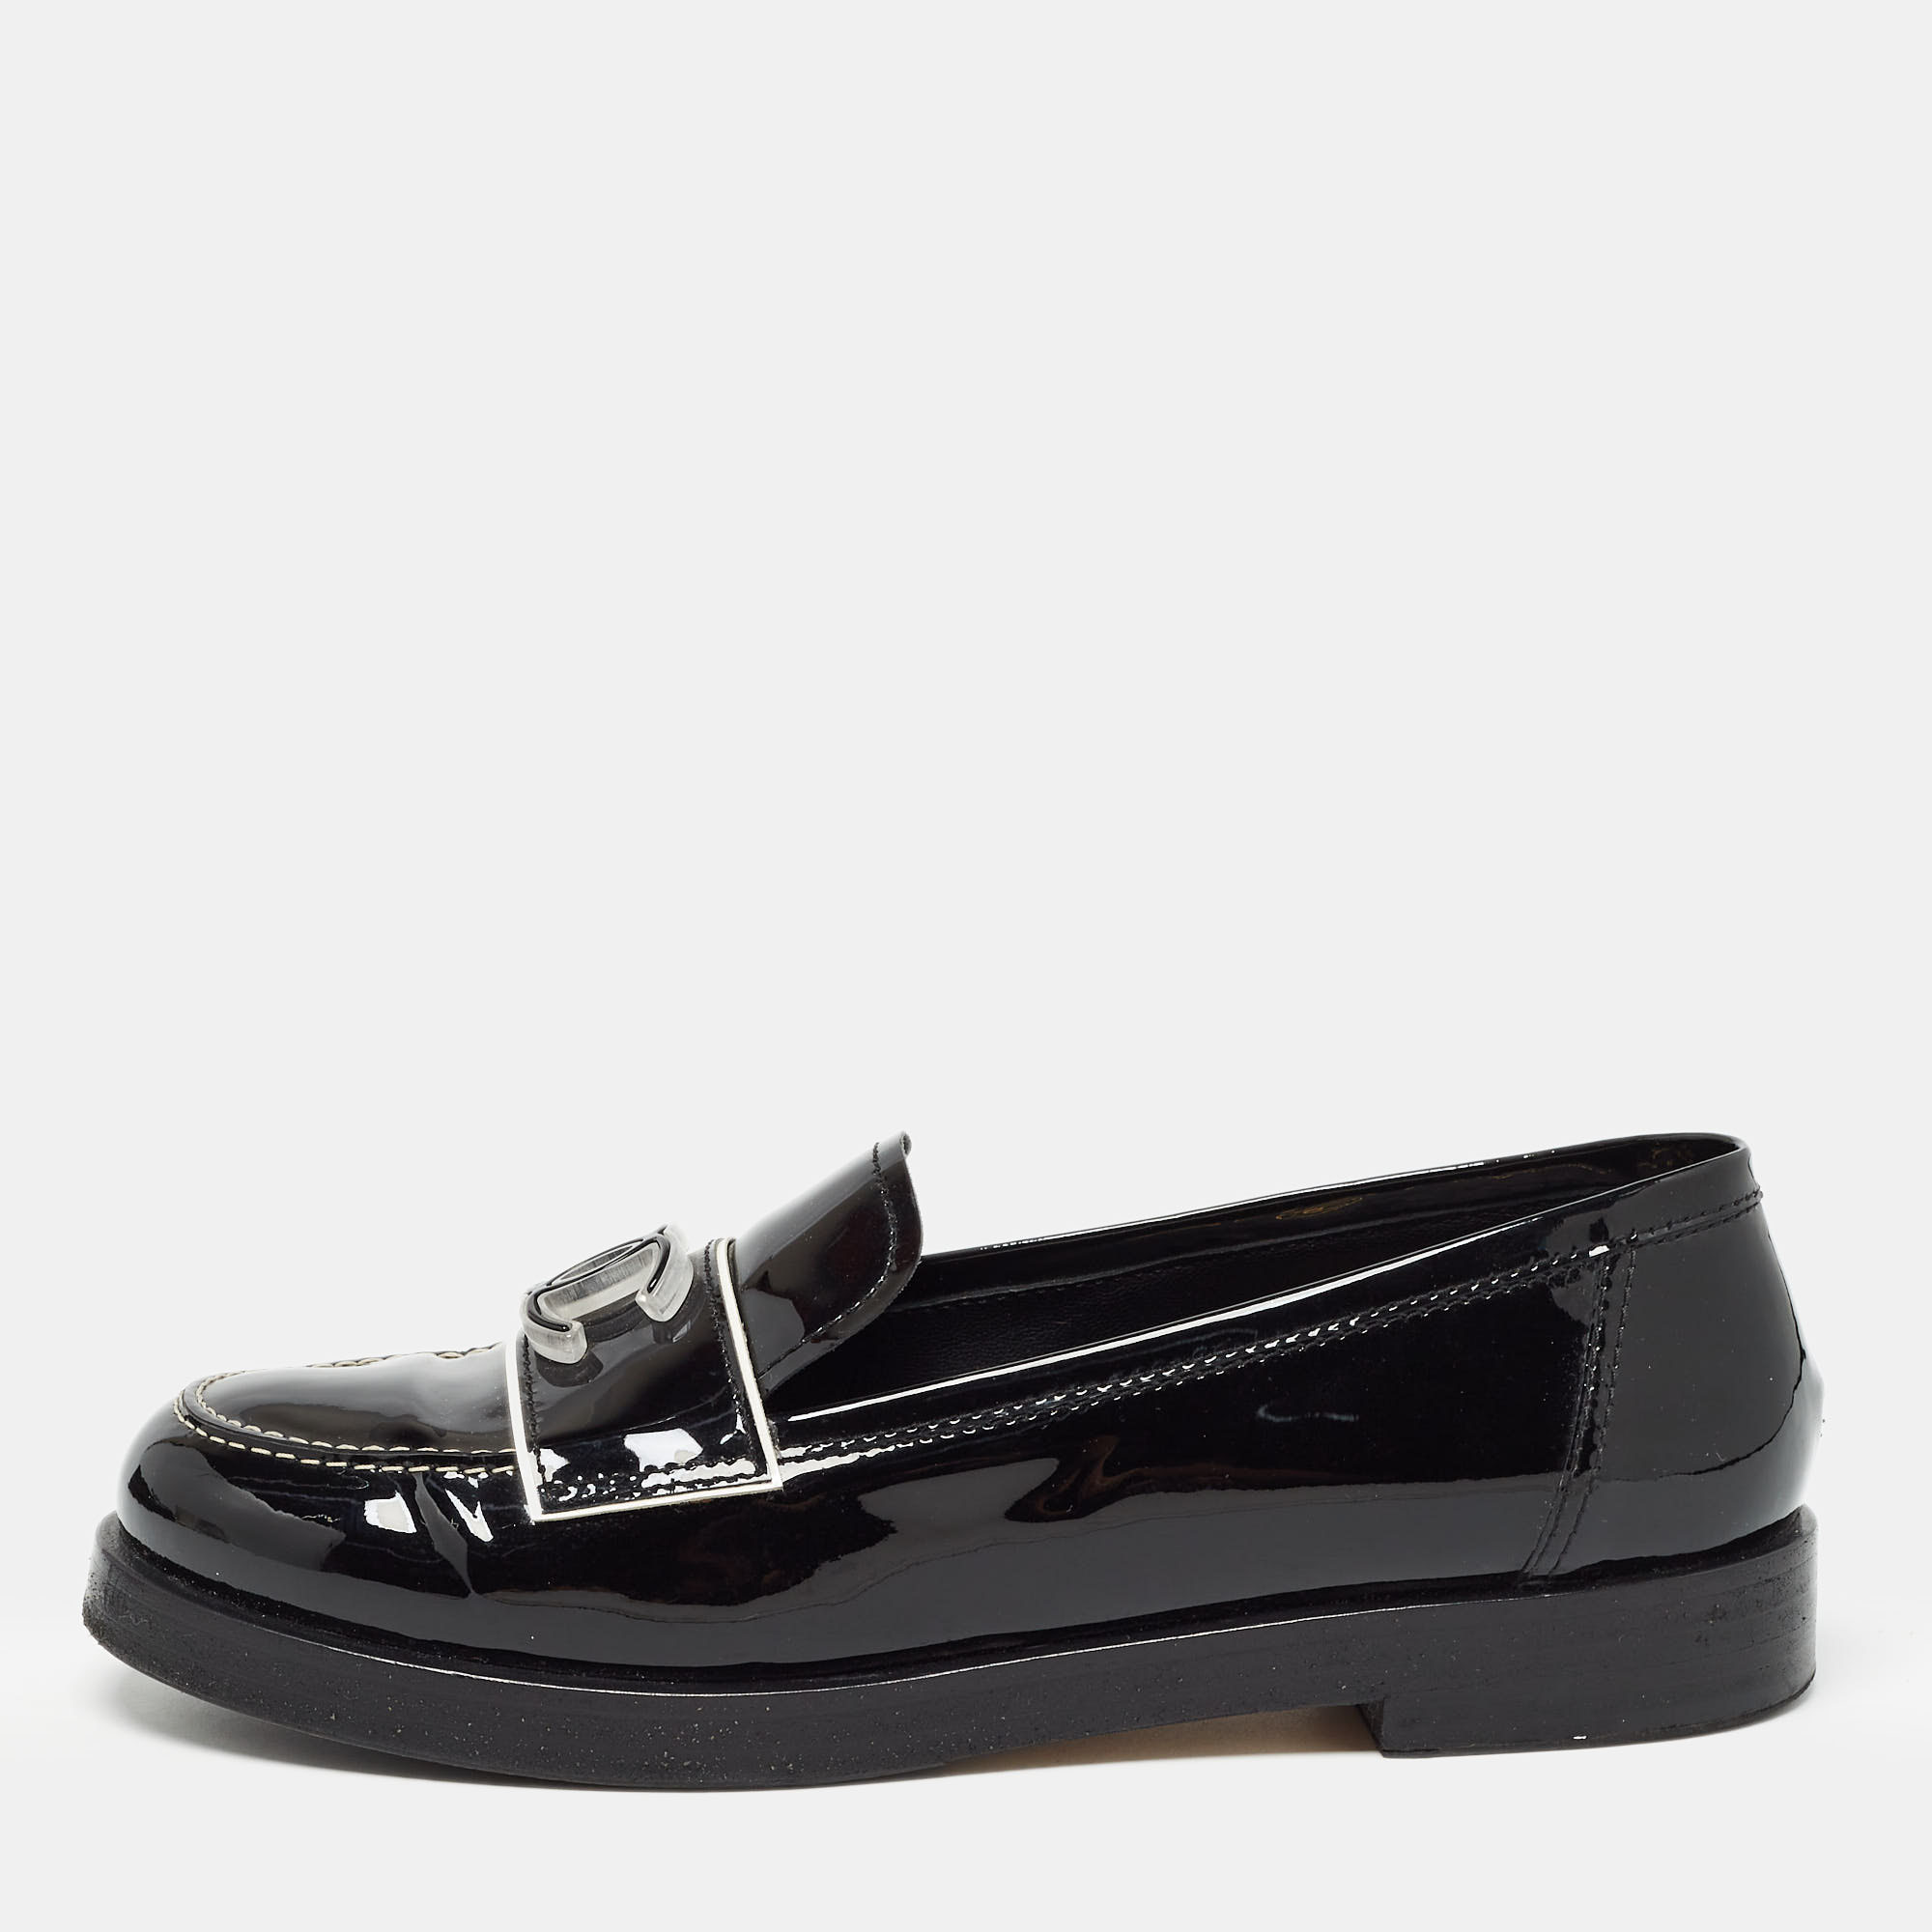 Chanel Black Patent Leather CC Slip On Loafers Size 38.5